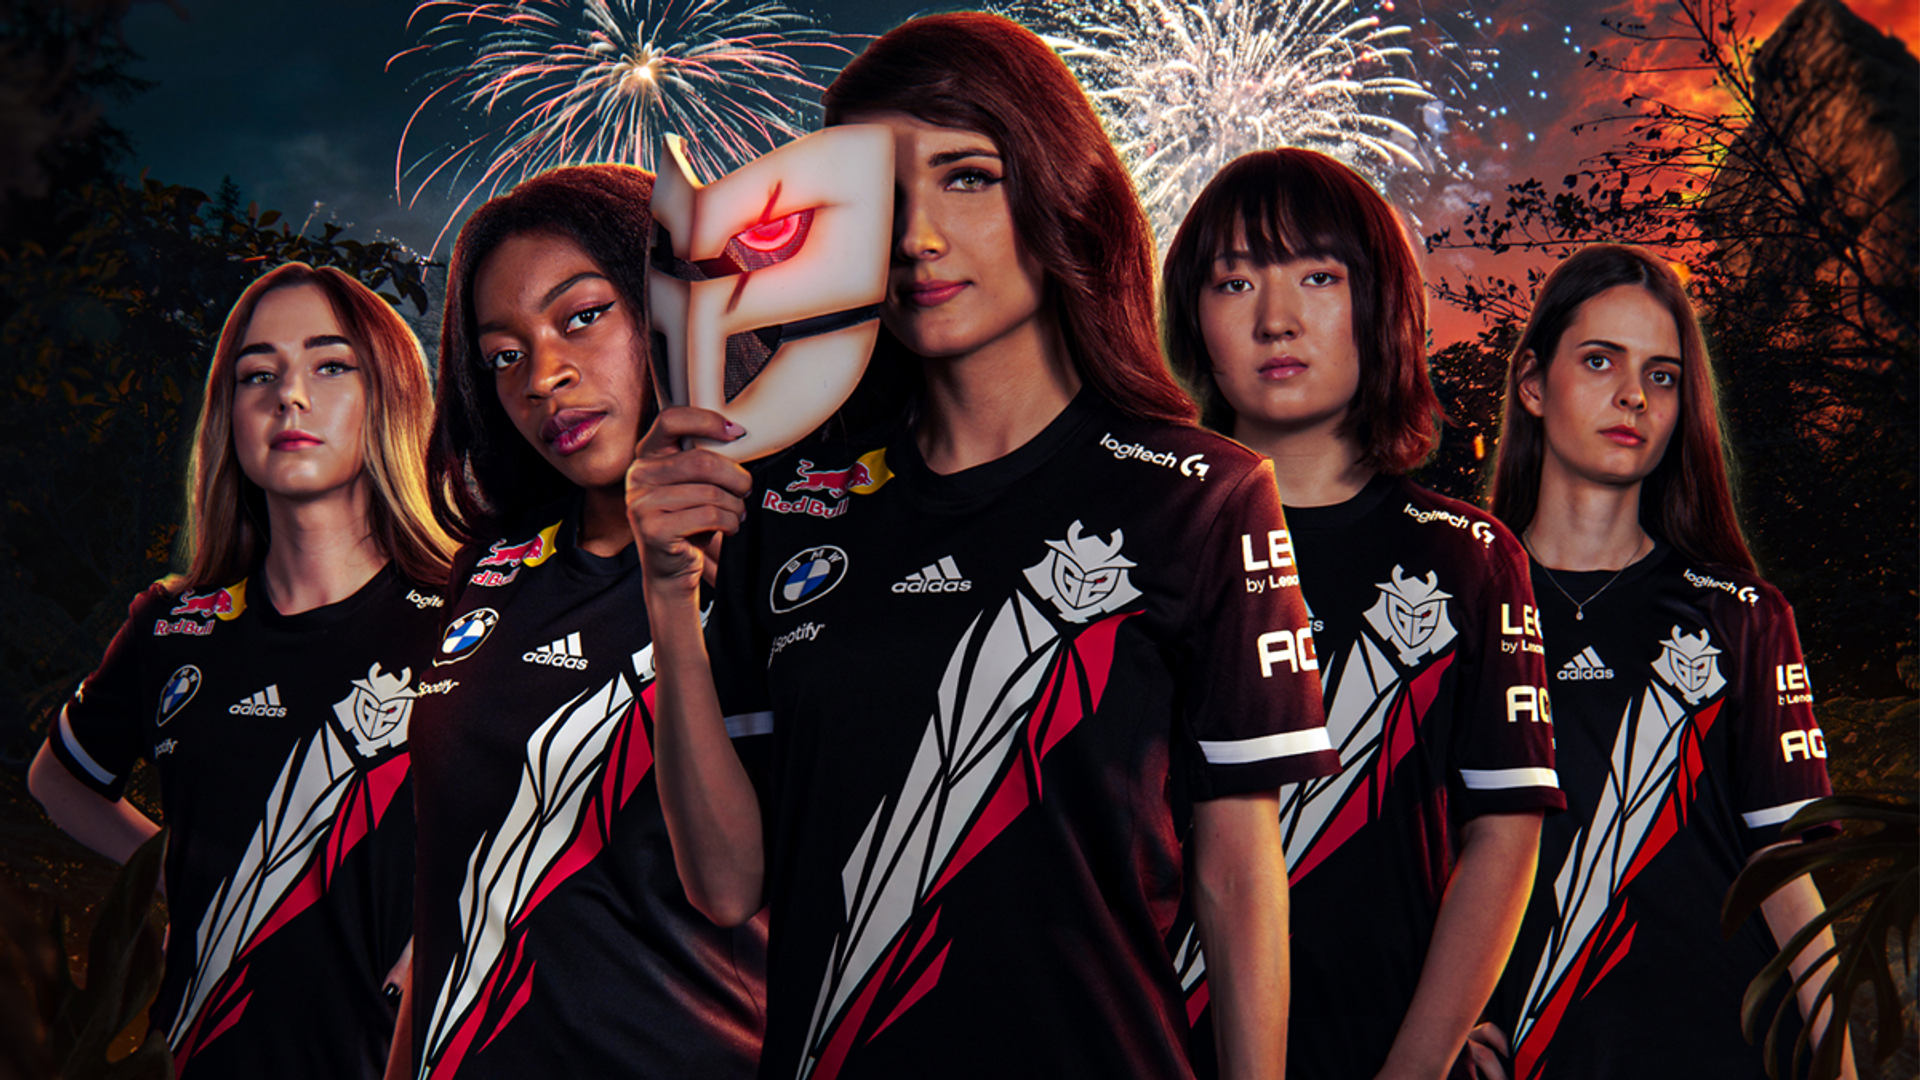 Riot speeds up in the race for women's inclusion in LoL esports